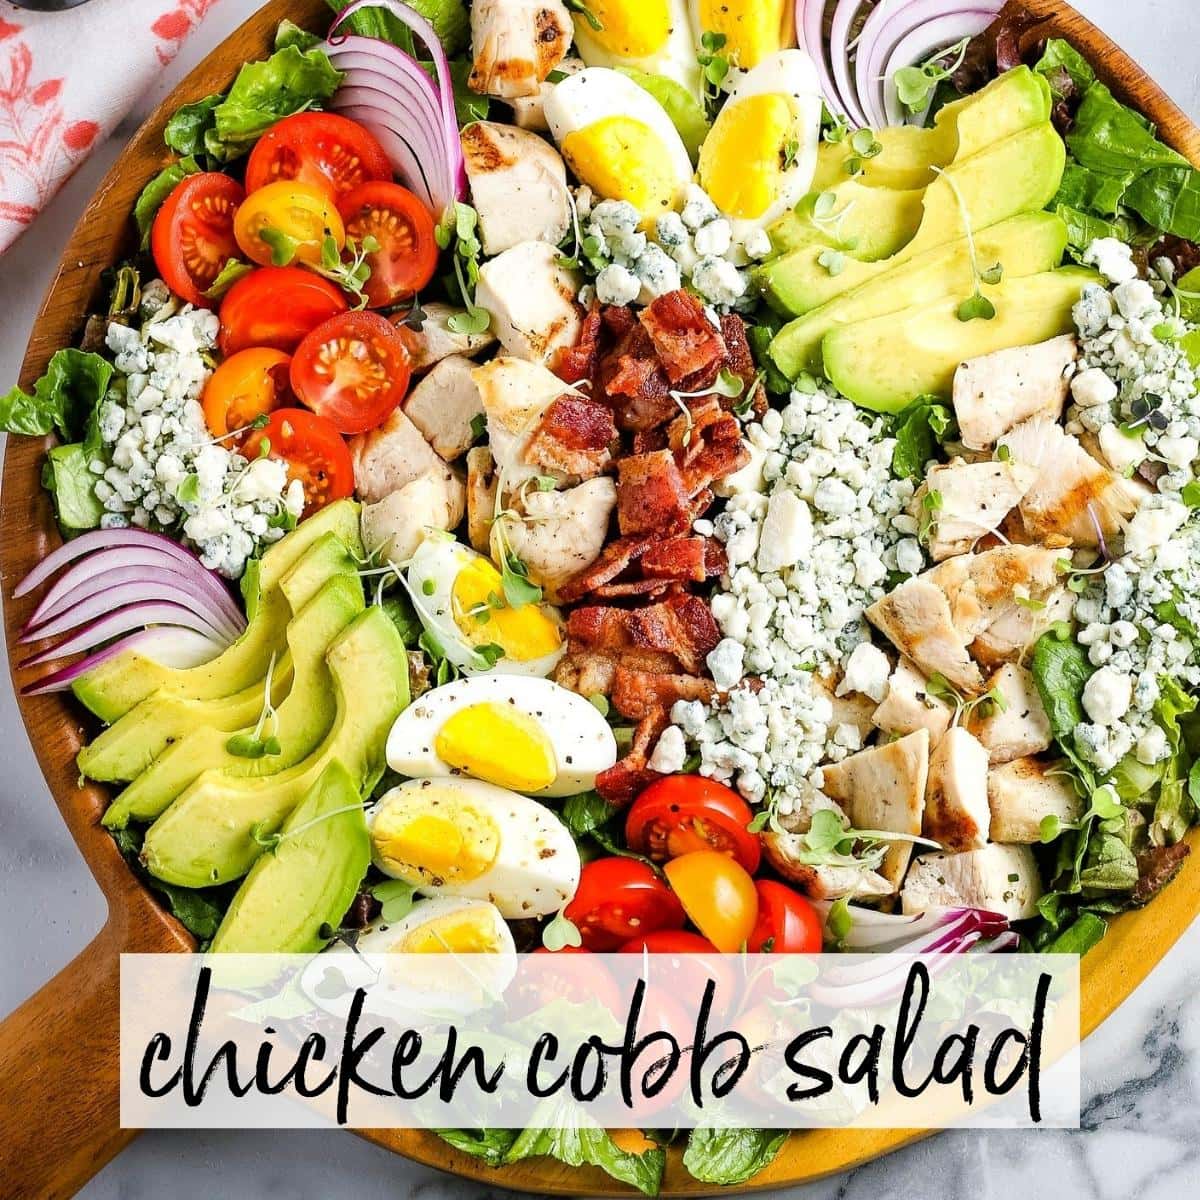 Chicken Cobb salad in a wooden serving bowl with graphic overlay.